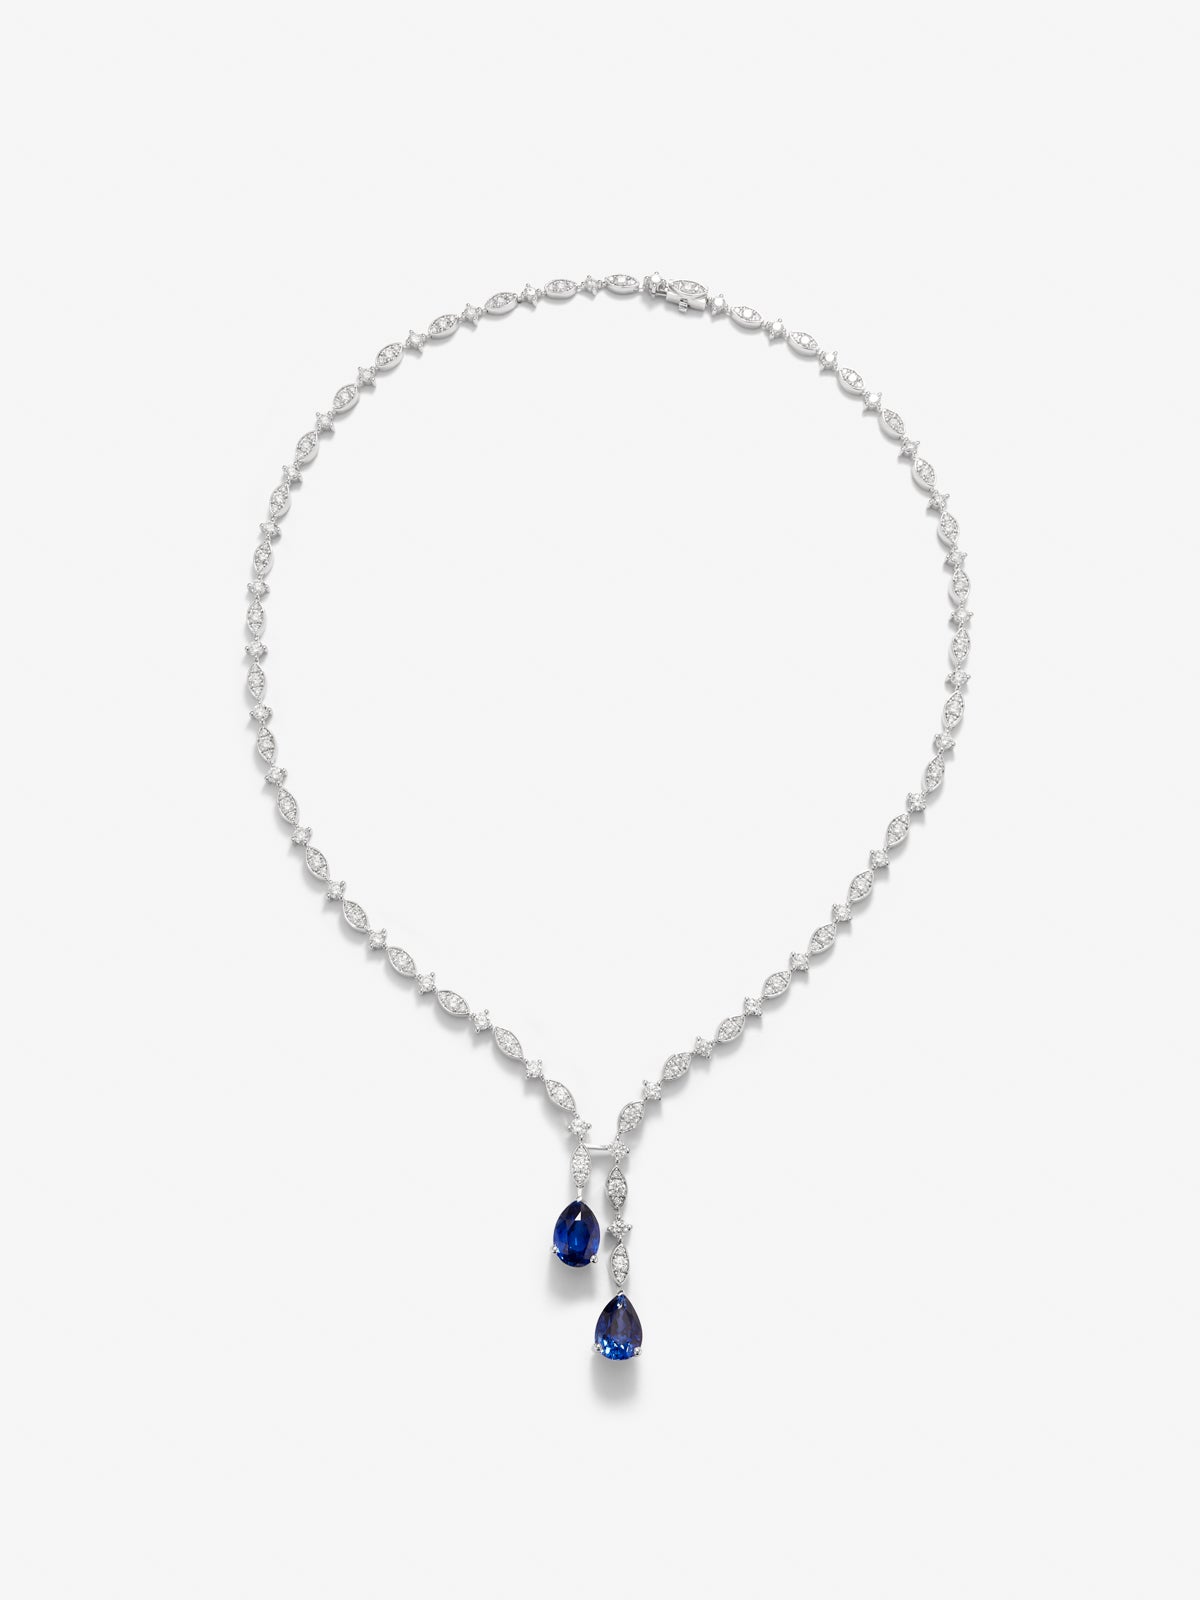 18K white gold necklace with intense blue sapps in 6.43 cts and white diamonds in 6.51 cts bright diamonds